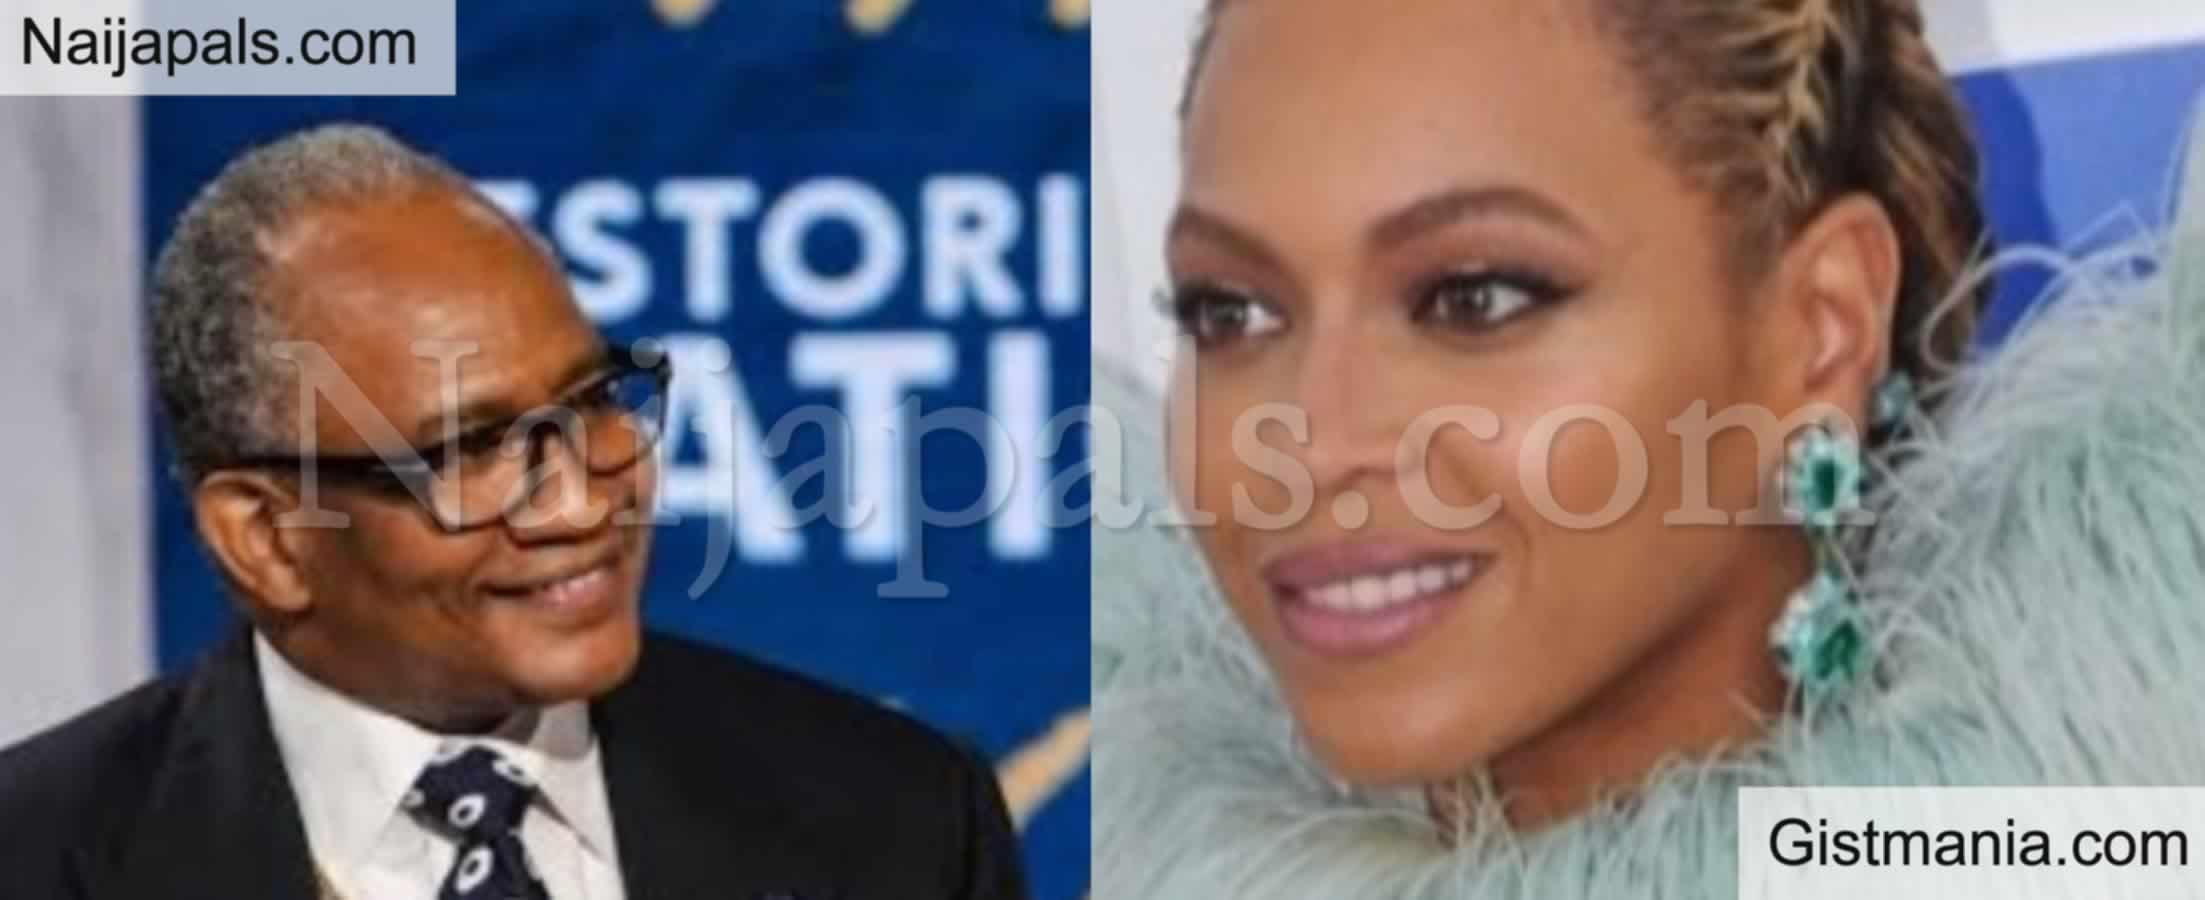 <img alt='.' class='lazyload' data-src='https://img.gistmania.com/emot/comment.gif' /><b> Beyonce Sold Her Soul To The Devil - Pastor Says</b> Calls Her New Song "Church Girl" a Sacrilege